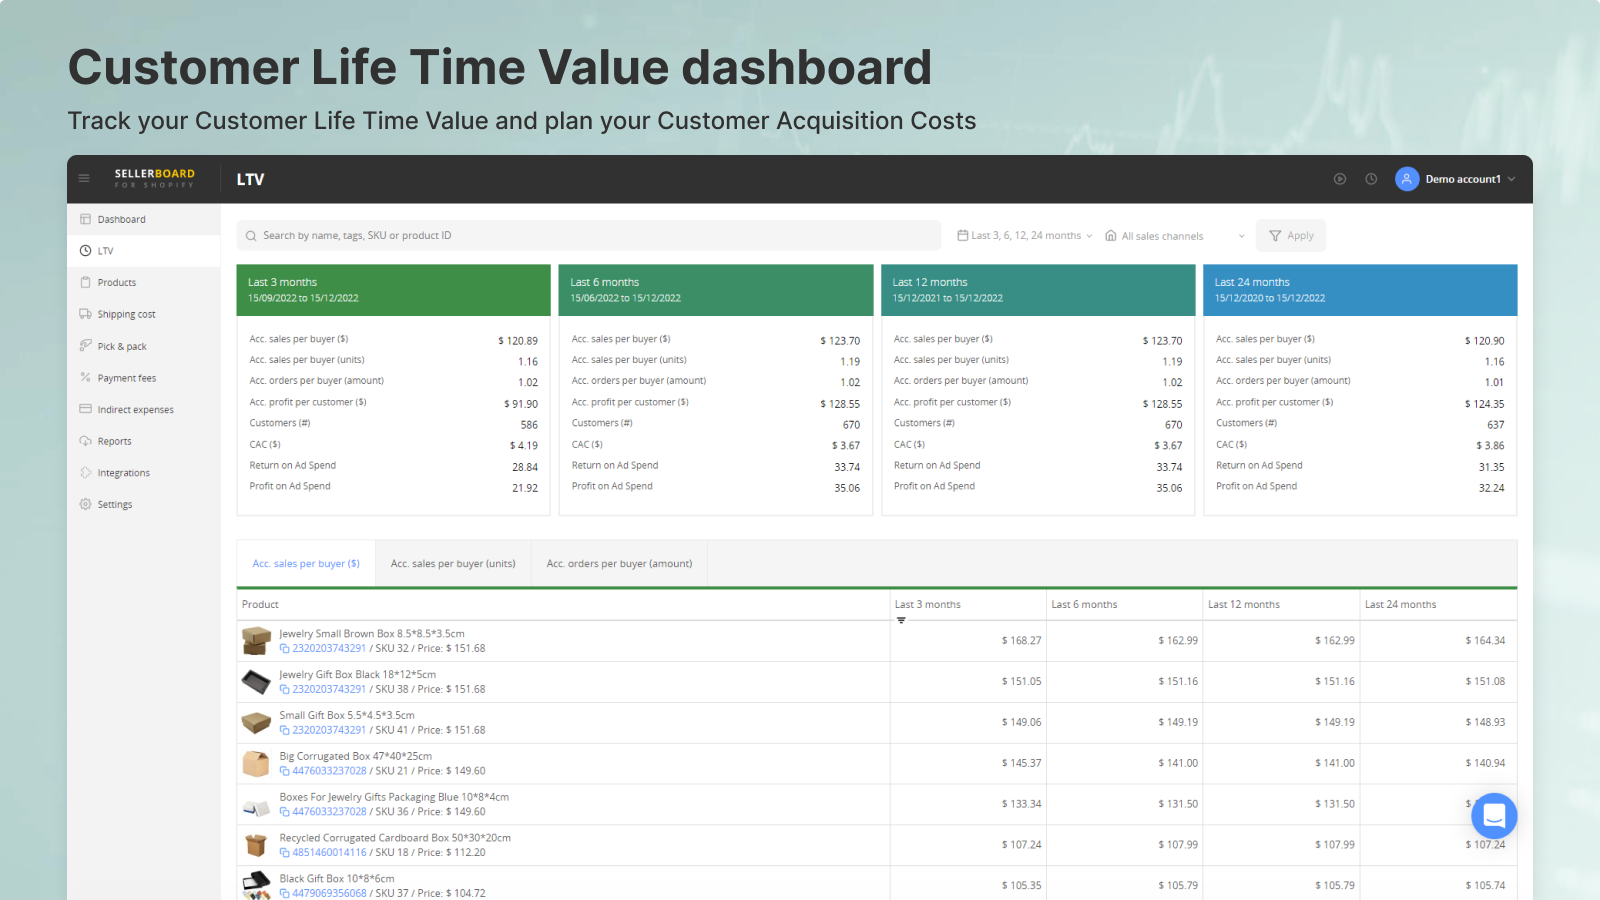 Customer Life Time Value dashboard